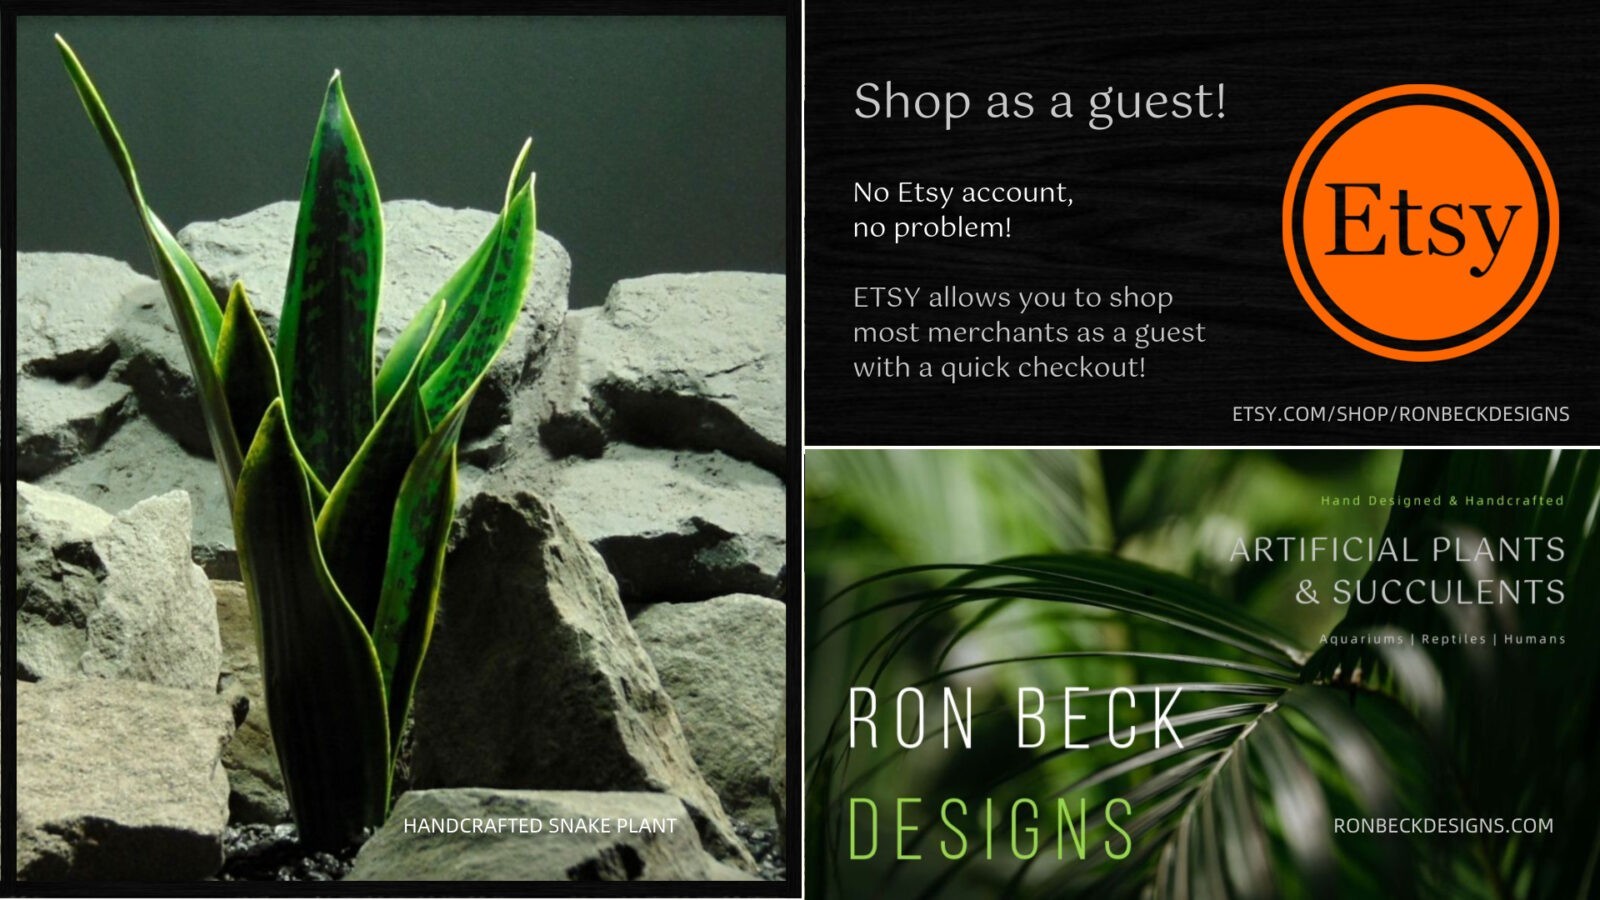 Ron Beck Designs - Etsy Shop and check out as a guest 1920 1080